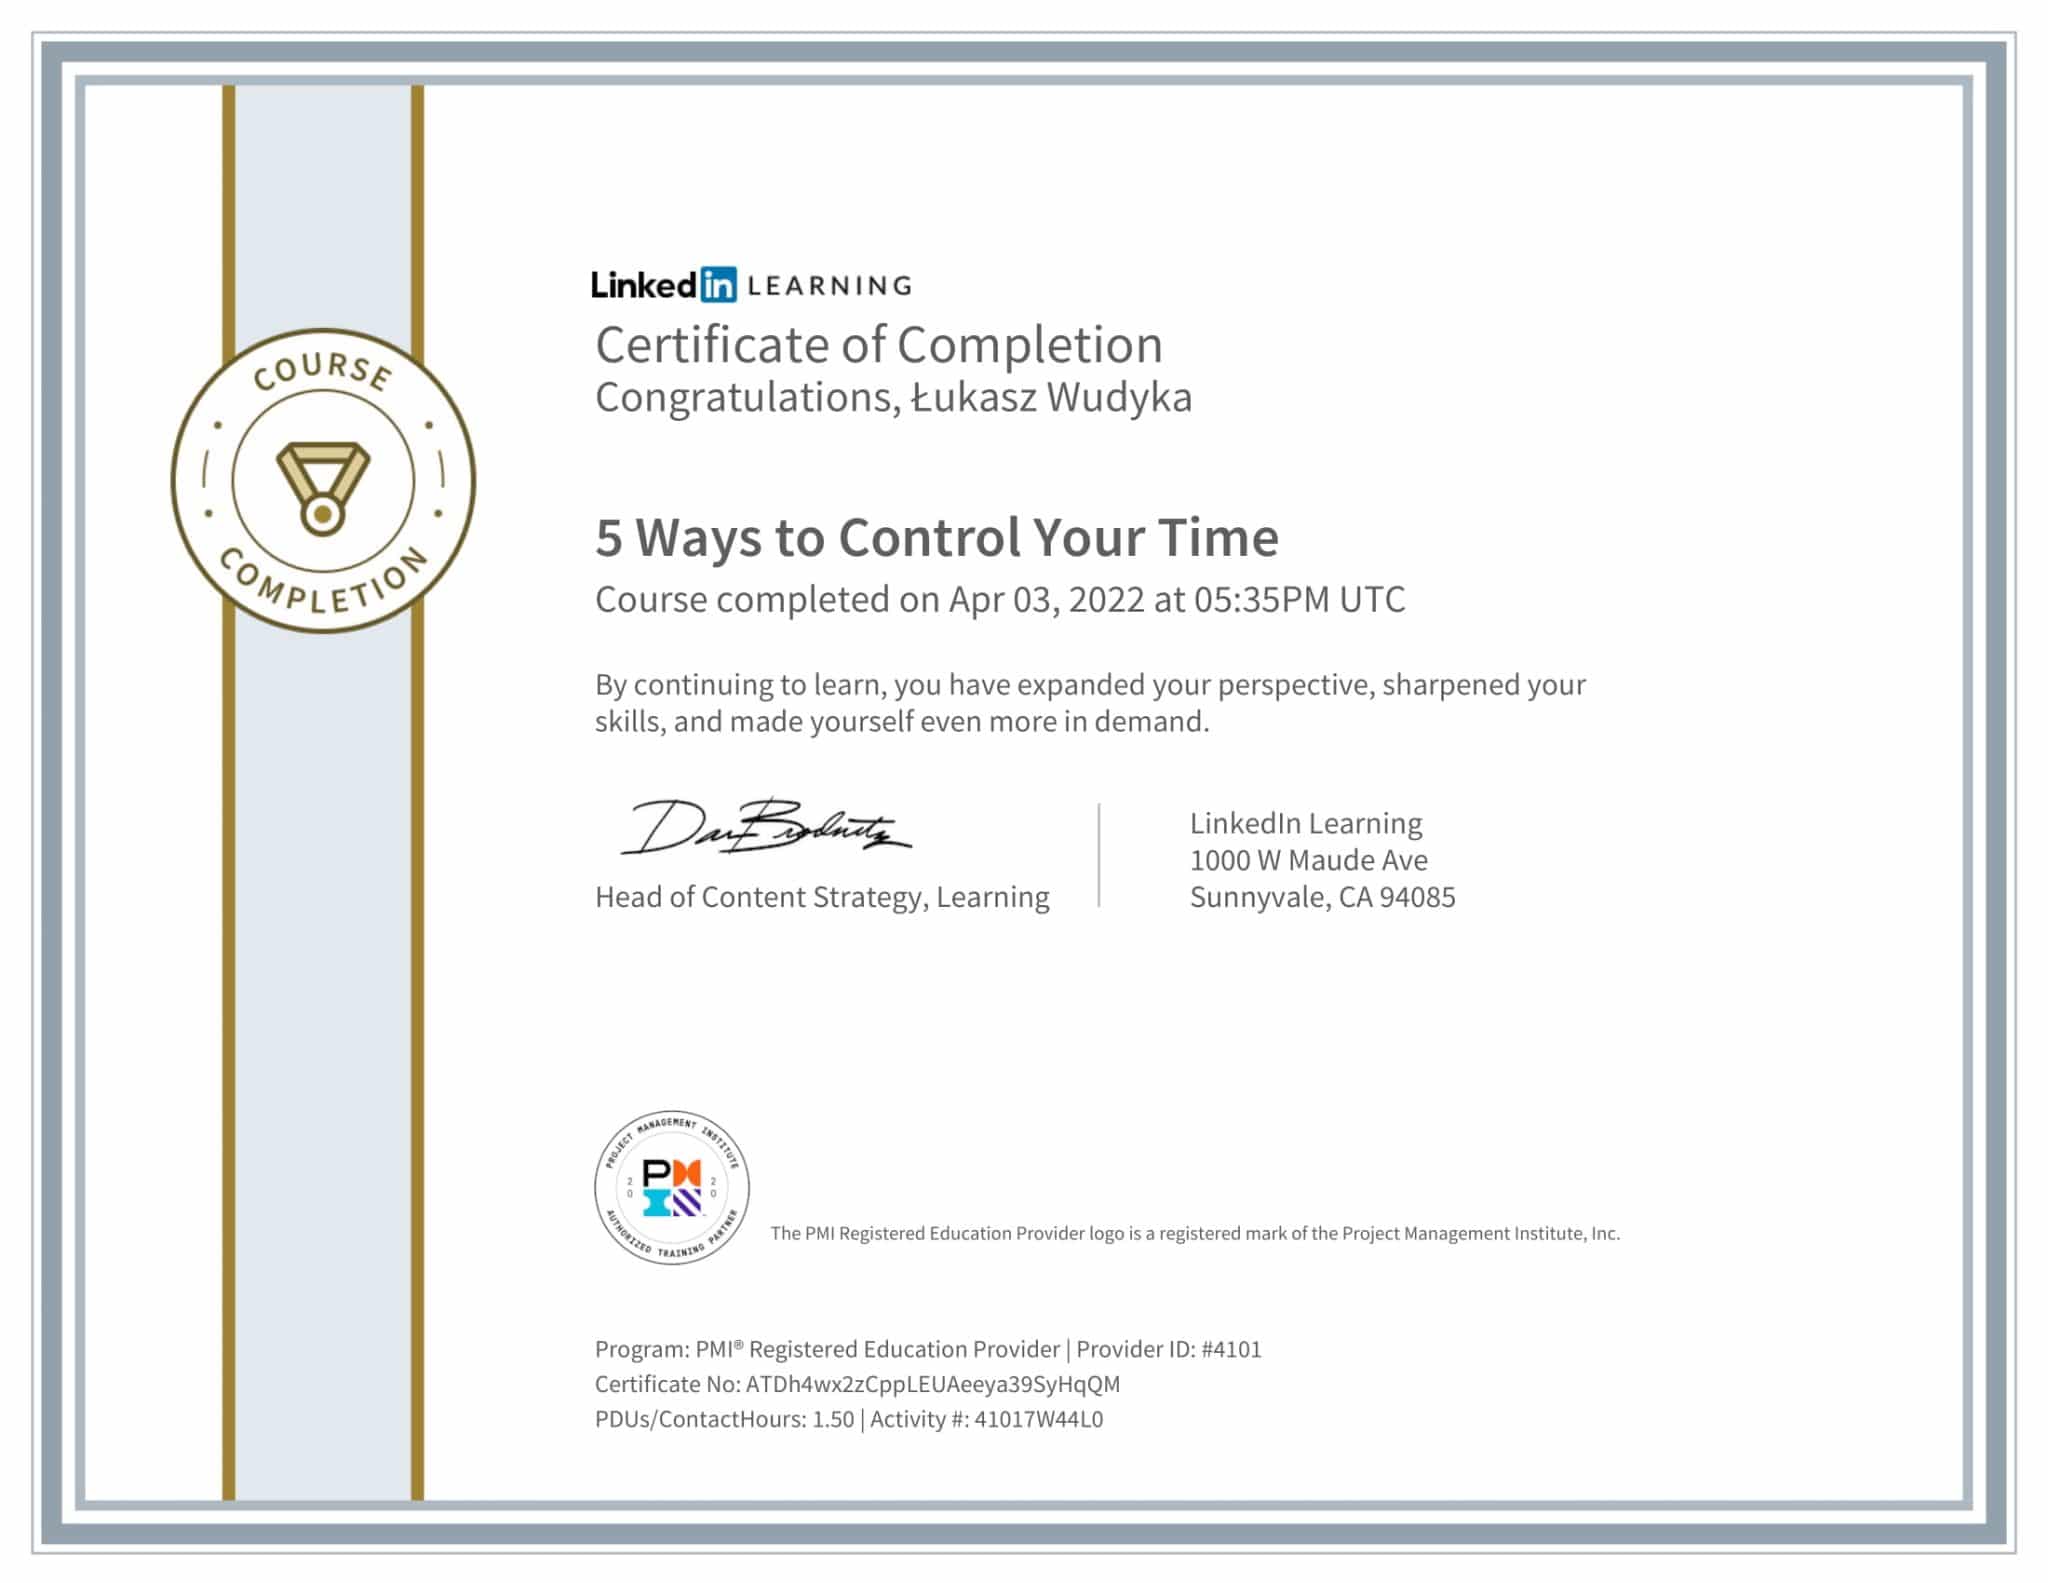 CertificateOfCompletion_5 Ways to Control Your Time-1